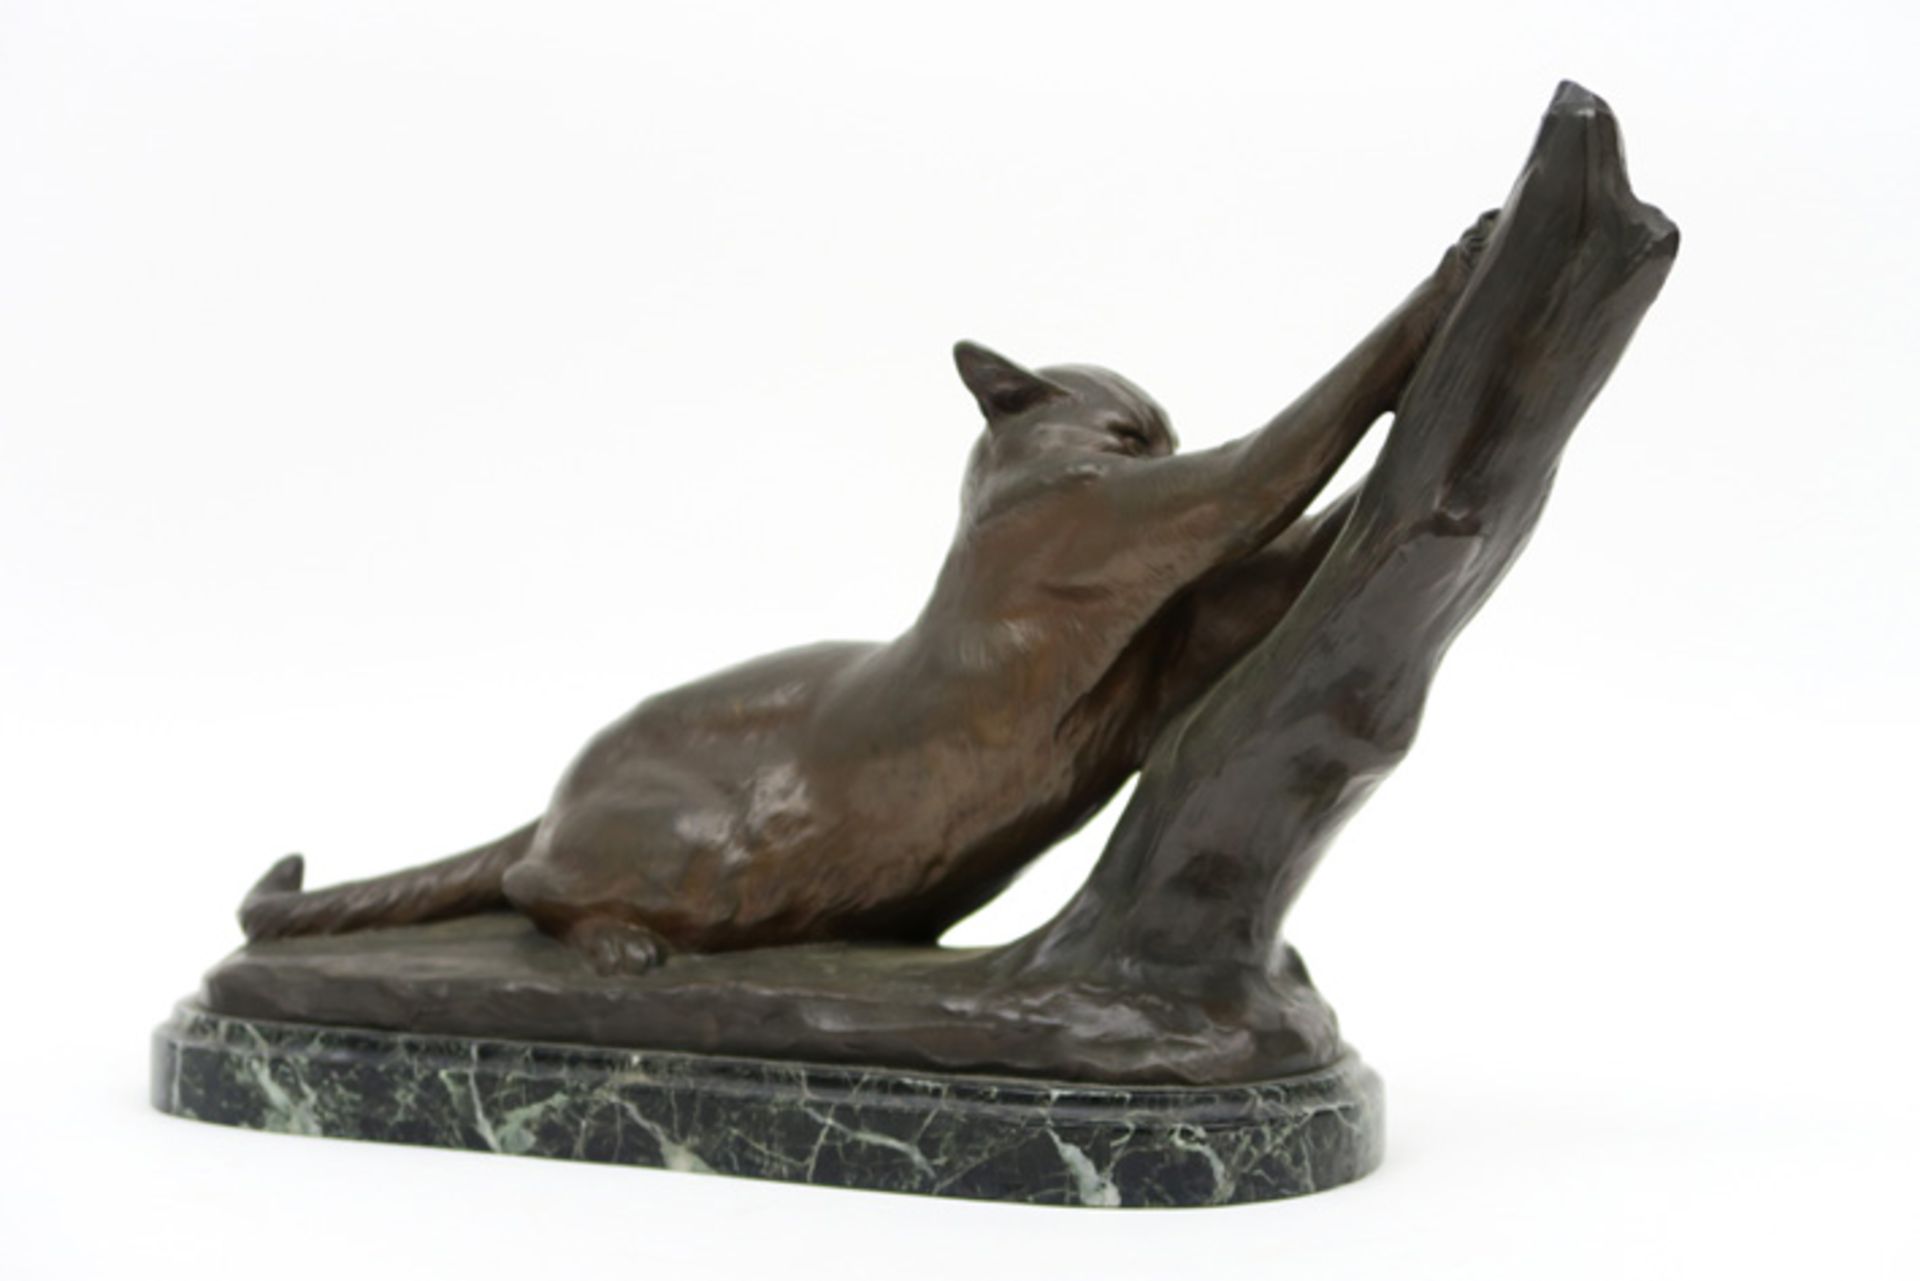 Louis Riché sculpture in bronze on a green marble base - signed || RICHÉ LOUIS (1877 - 1949) - Image 3 of 4